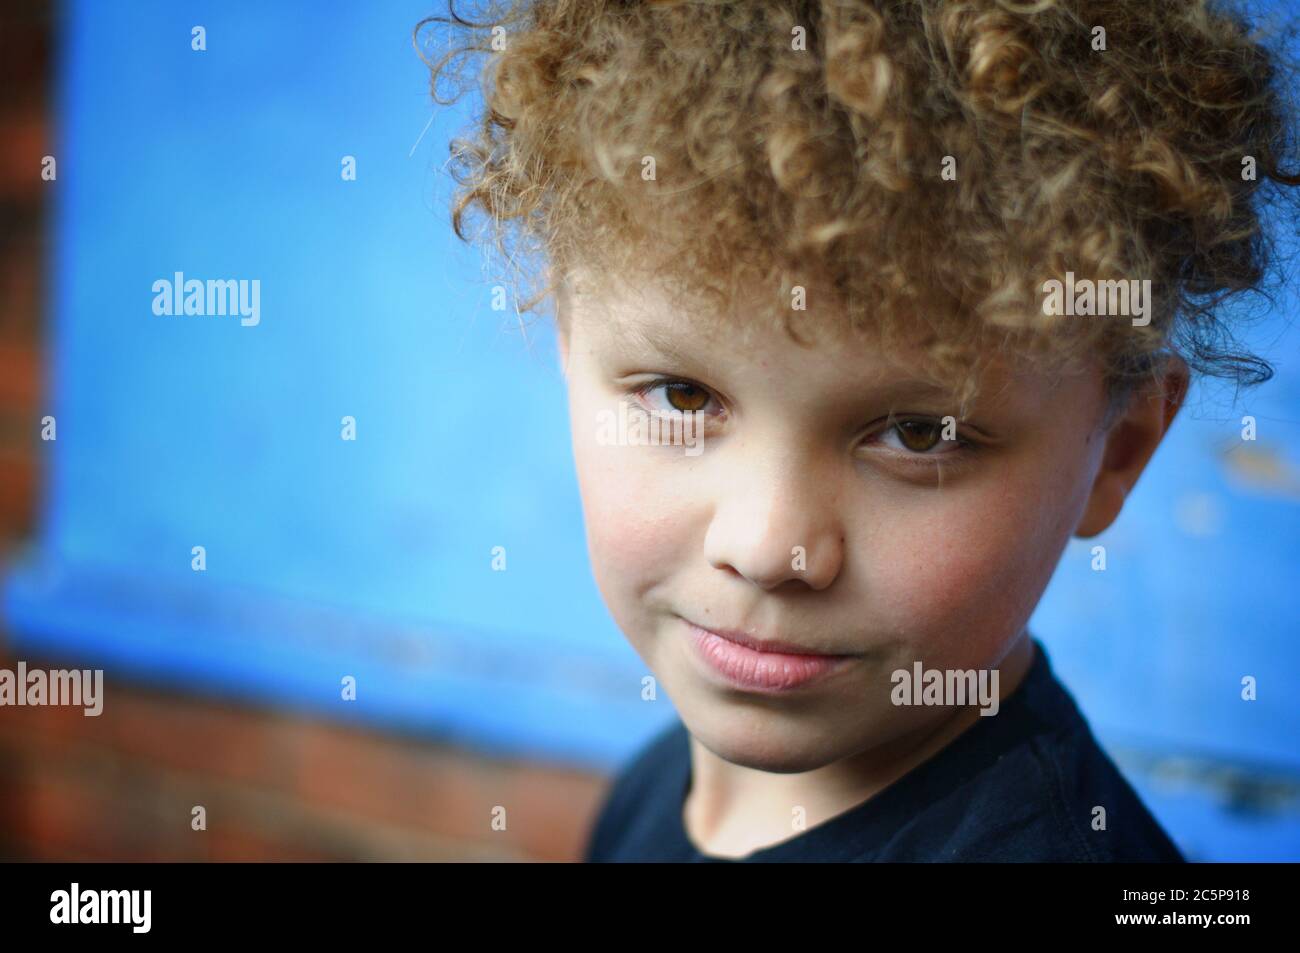 Young boy looking into the camera, smirking and thoughtful. Stock Photo